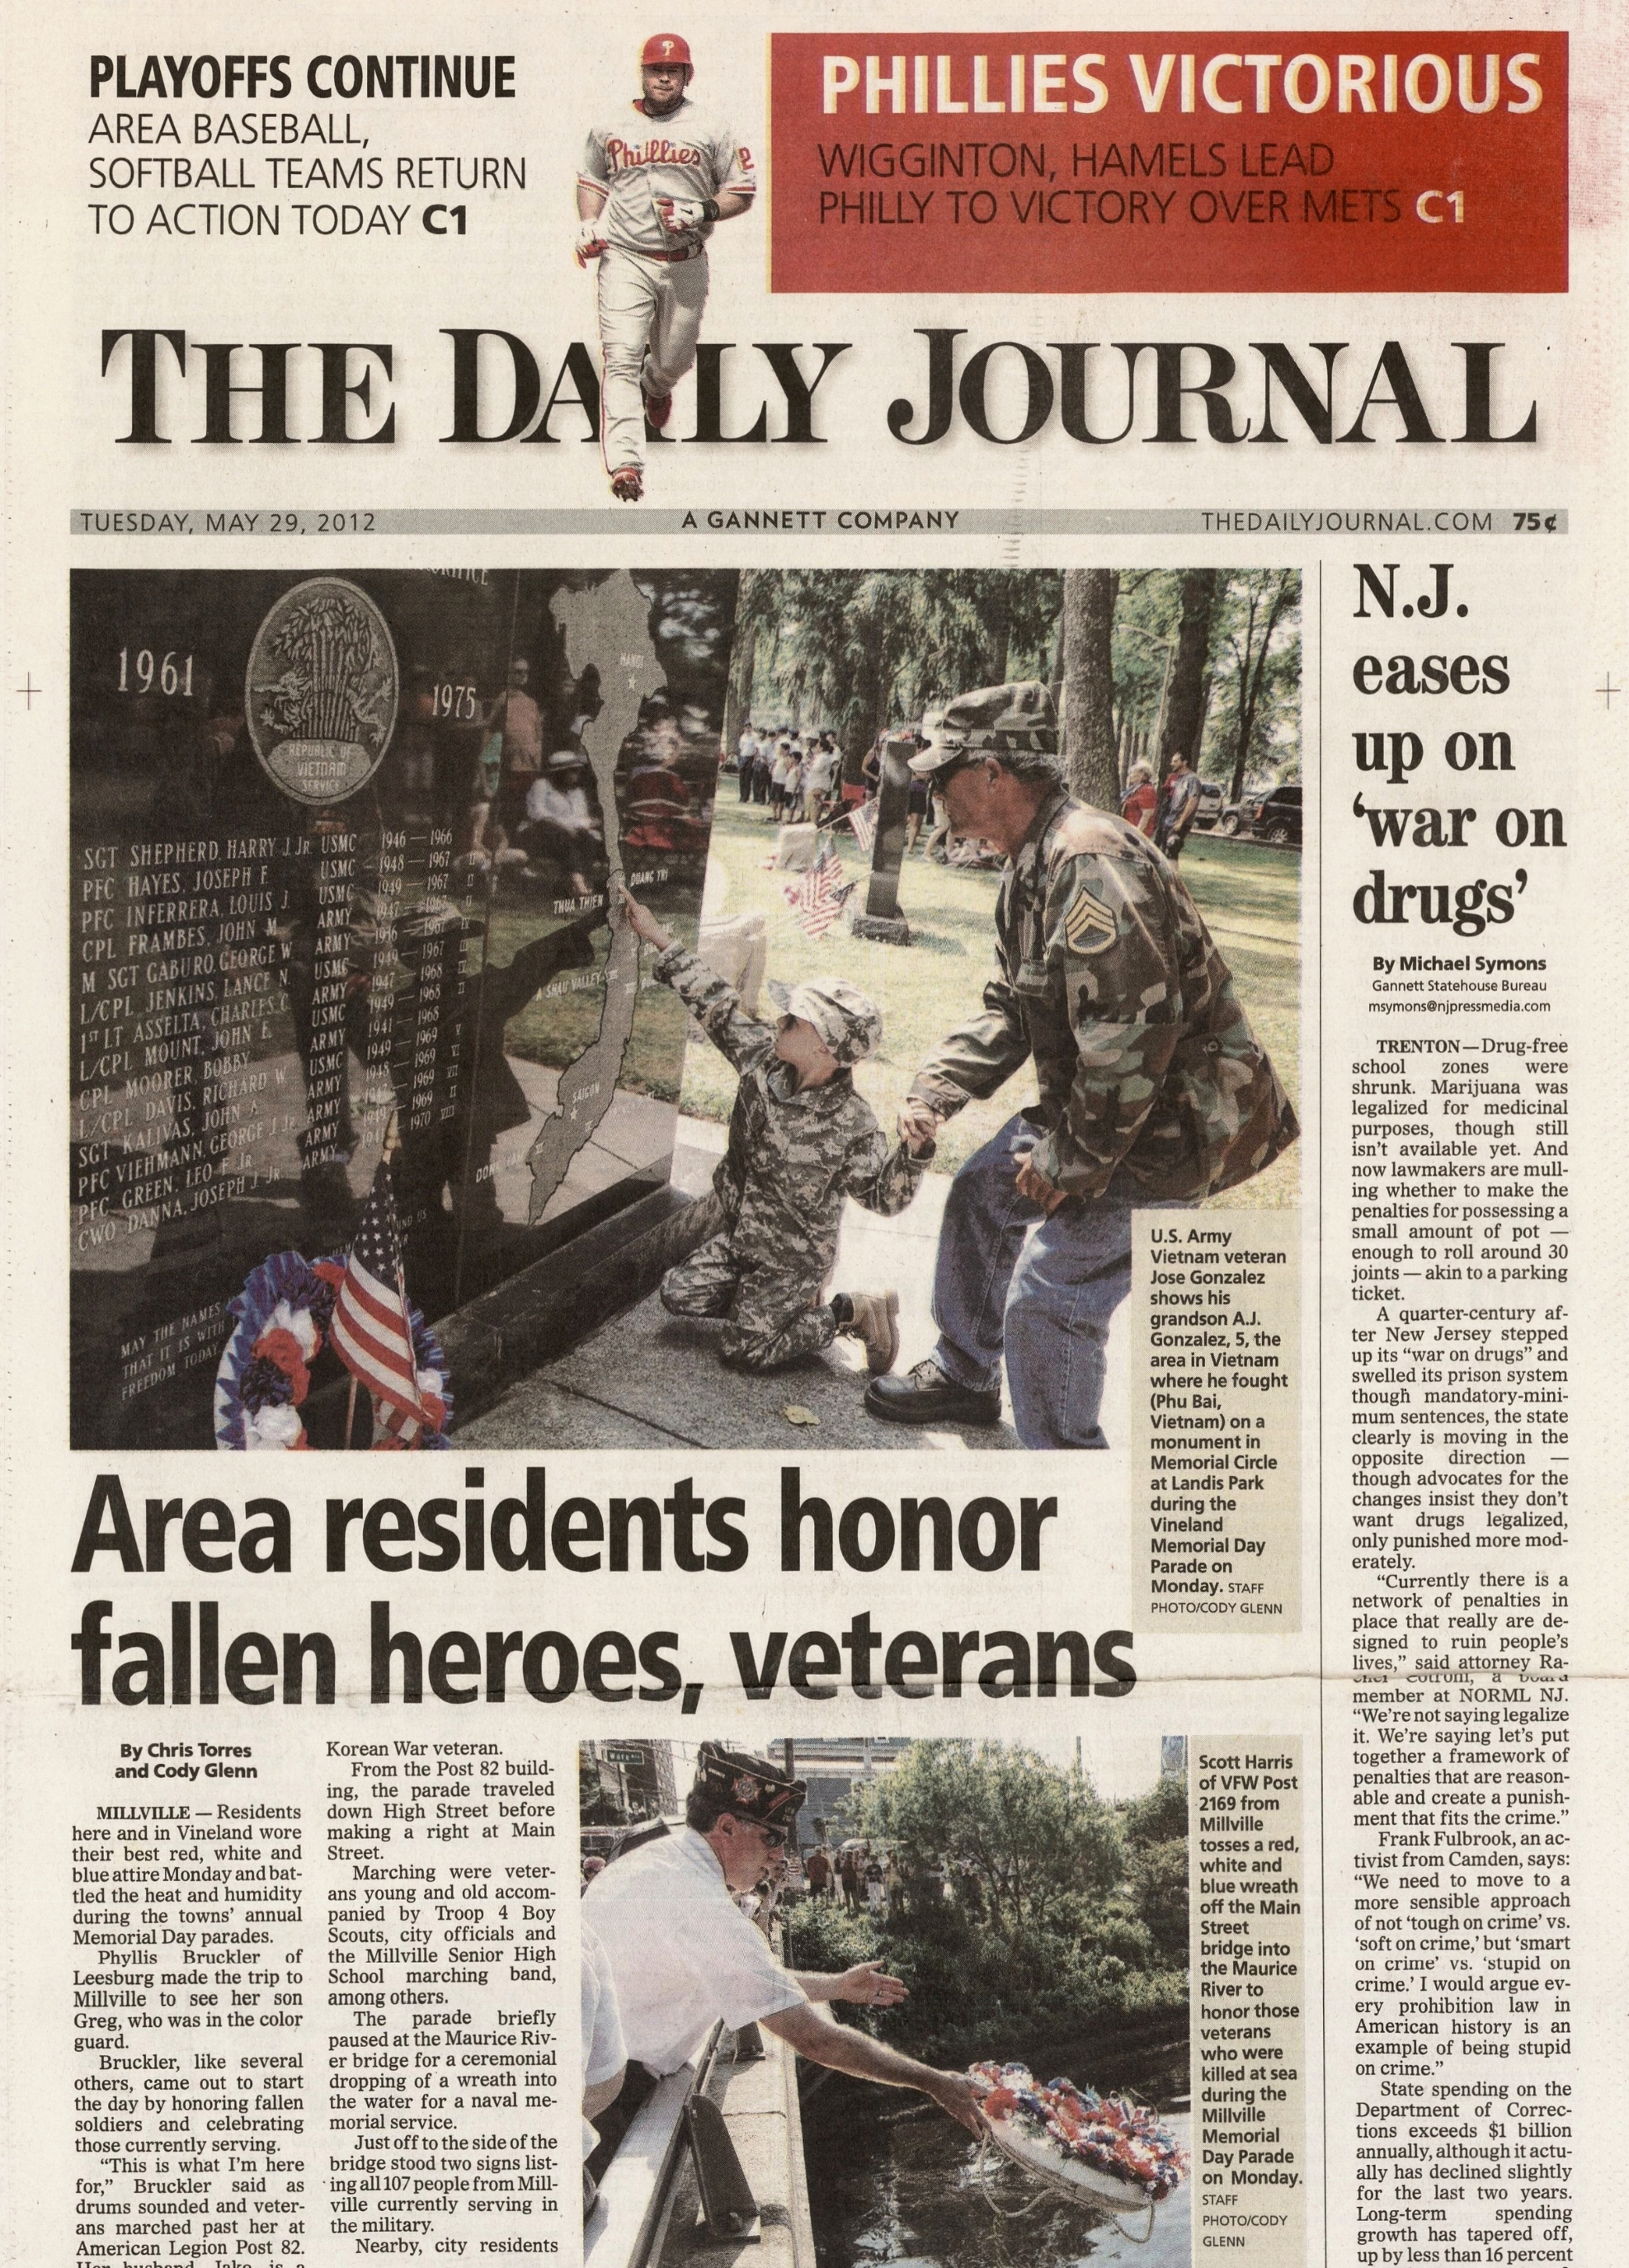  Memorial Day observations in Vineland and Millville May 29 2012 /  The Daily Journal  